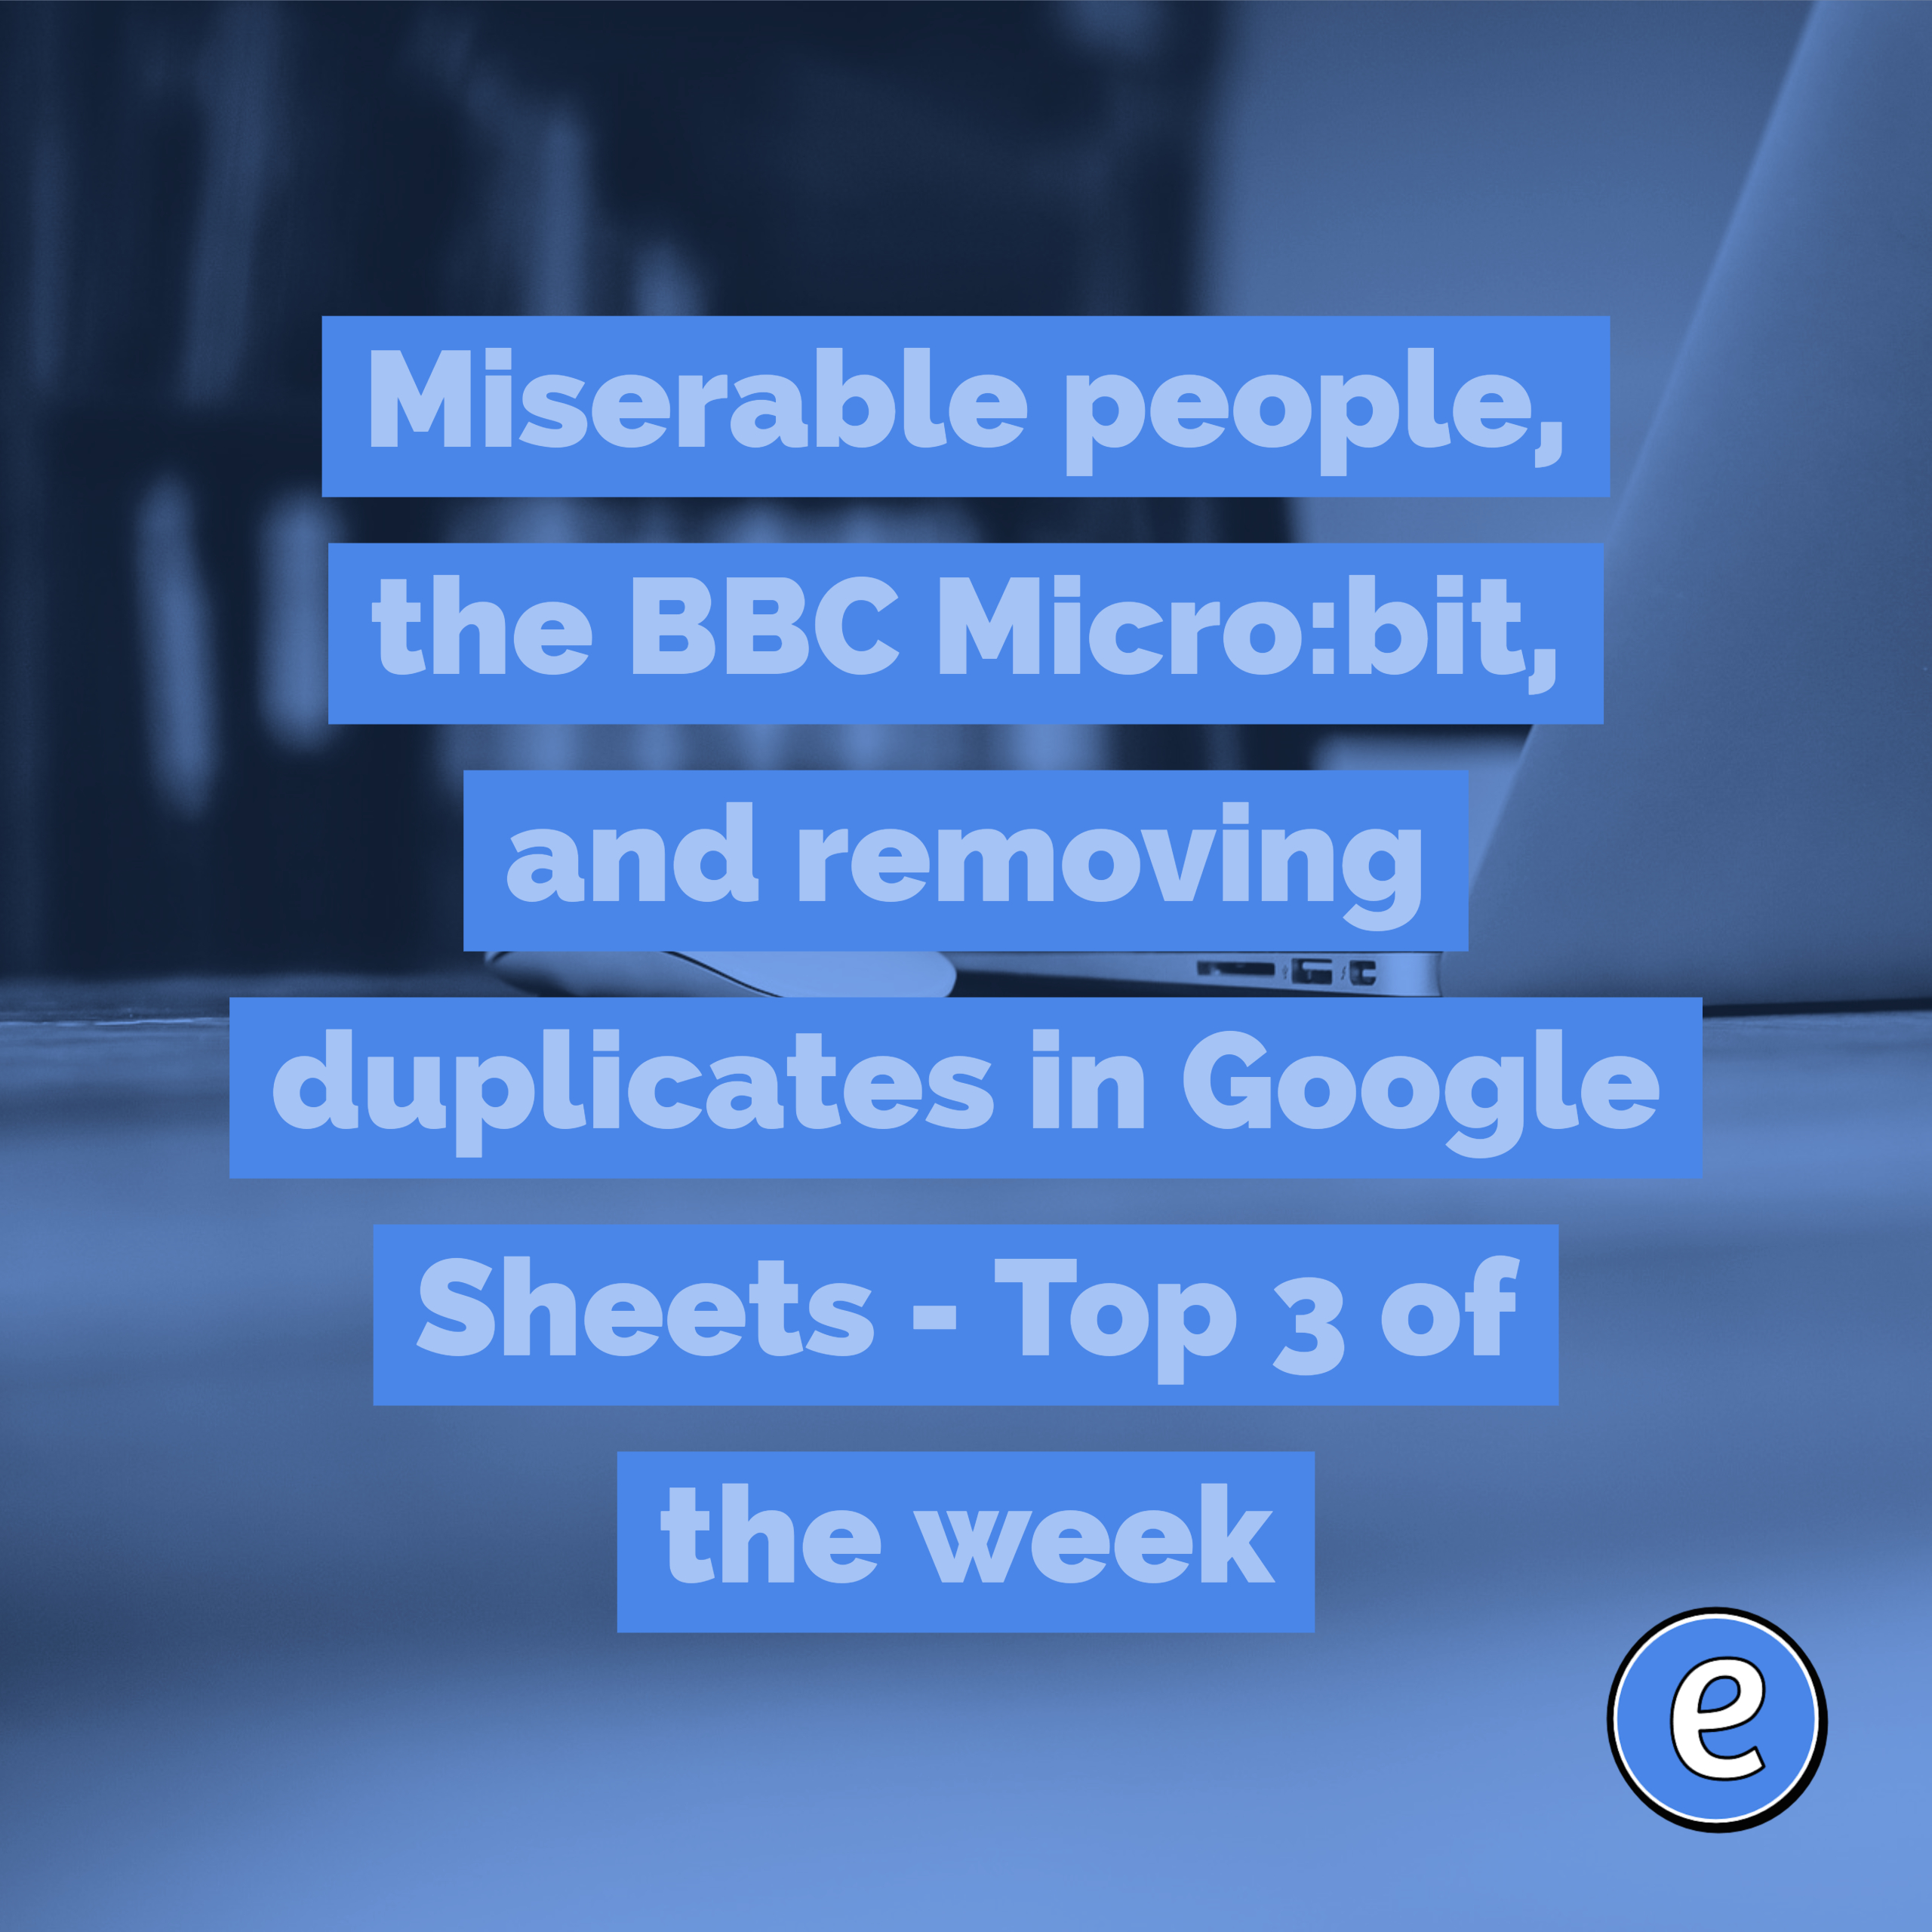 Miserable people, the BBC Micro:bit, and removing duplicates in Google Sheets – Top 3 of the week